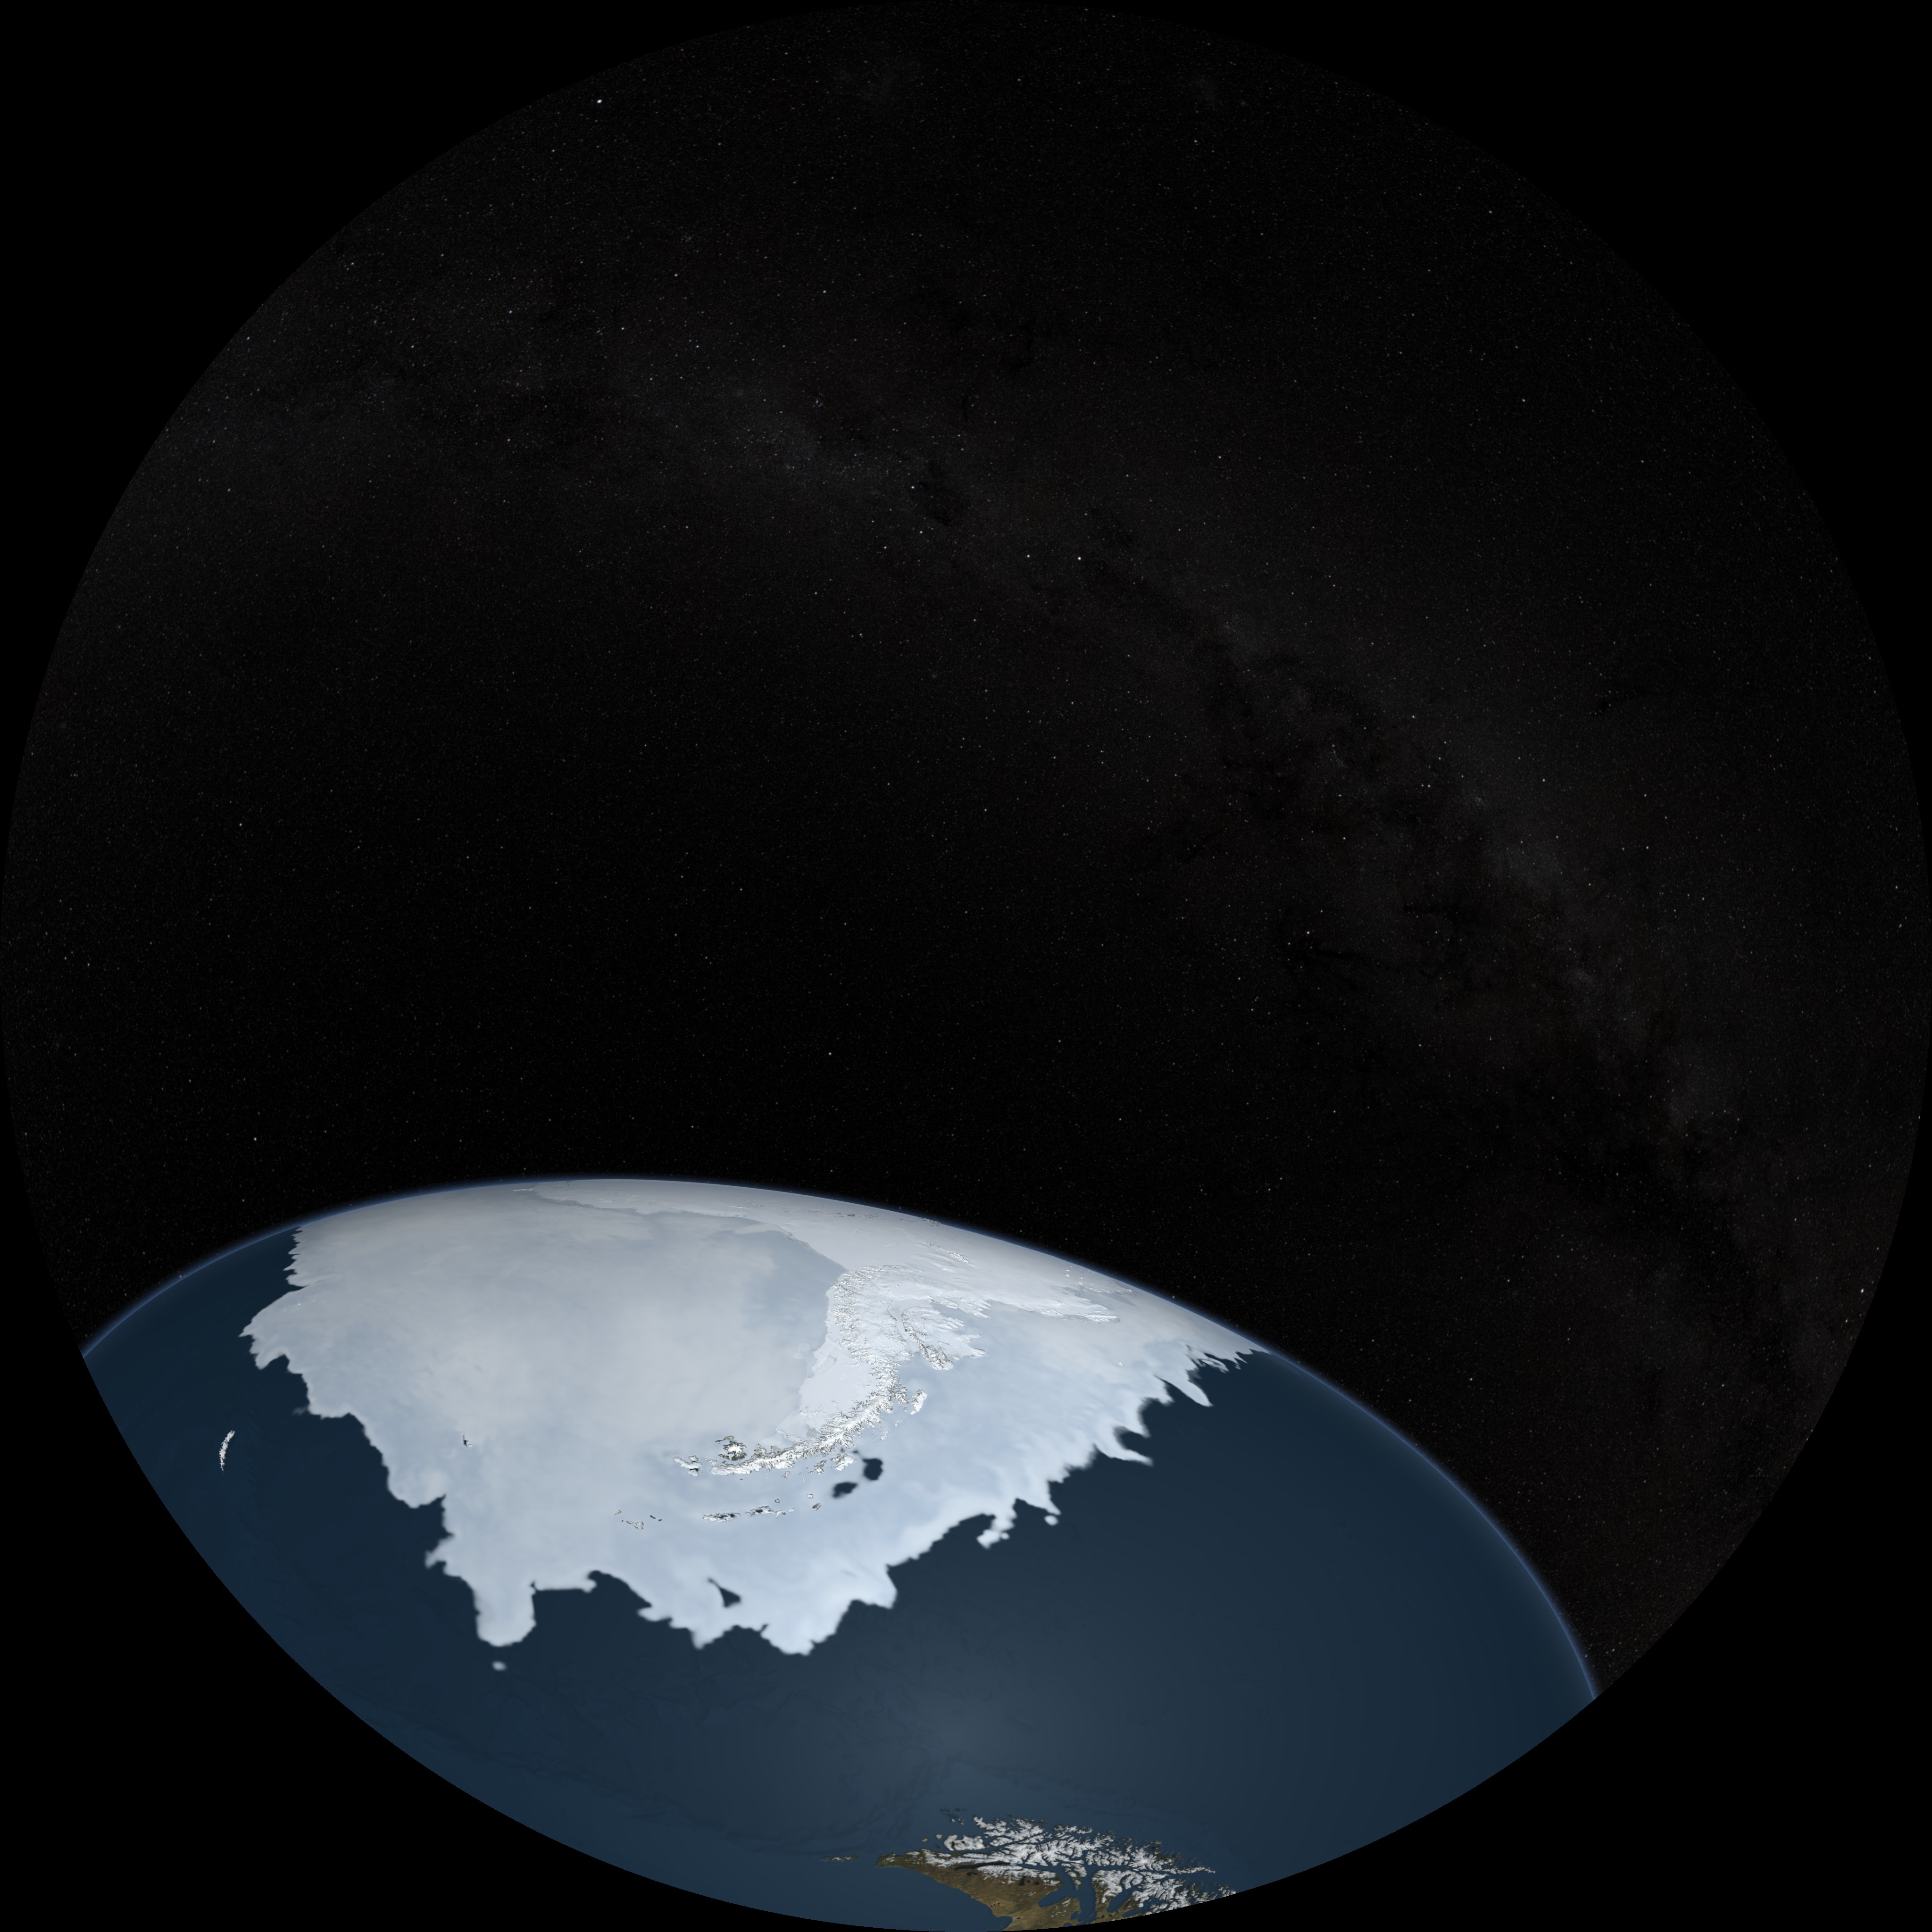 The composite animation showing the Earth with the sea ice over a star background with 8 bits per channel.